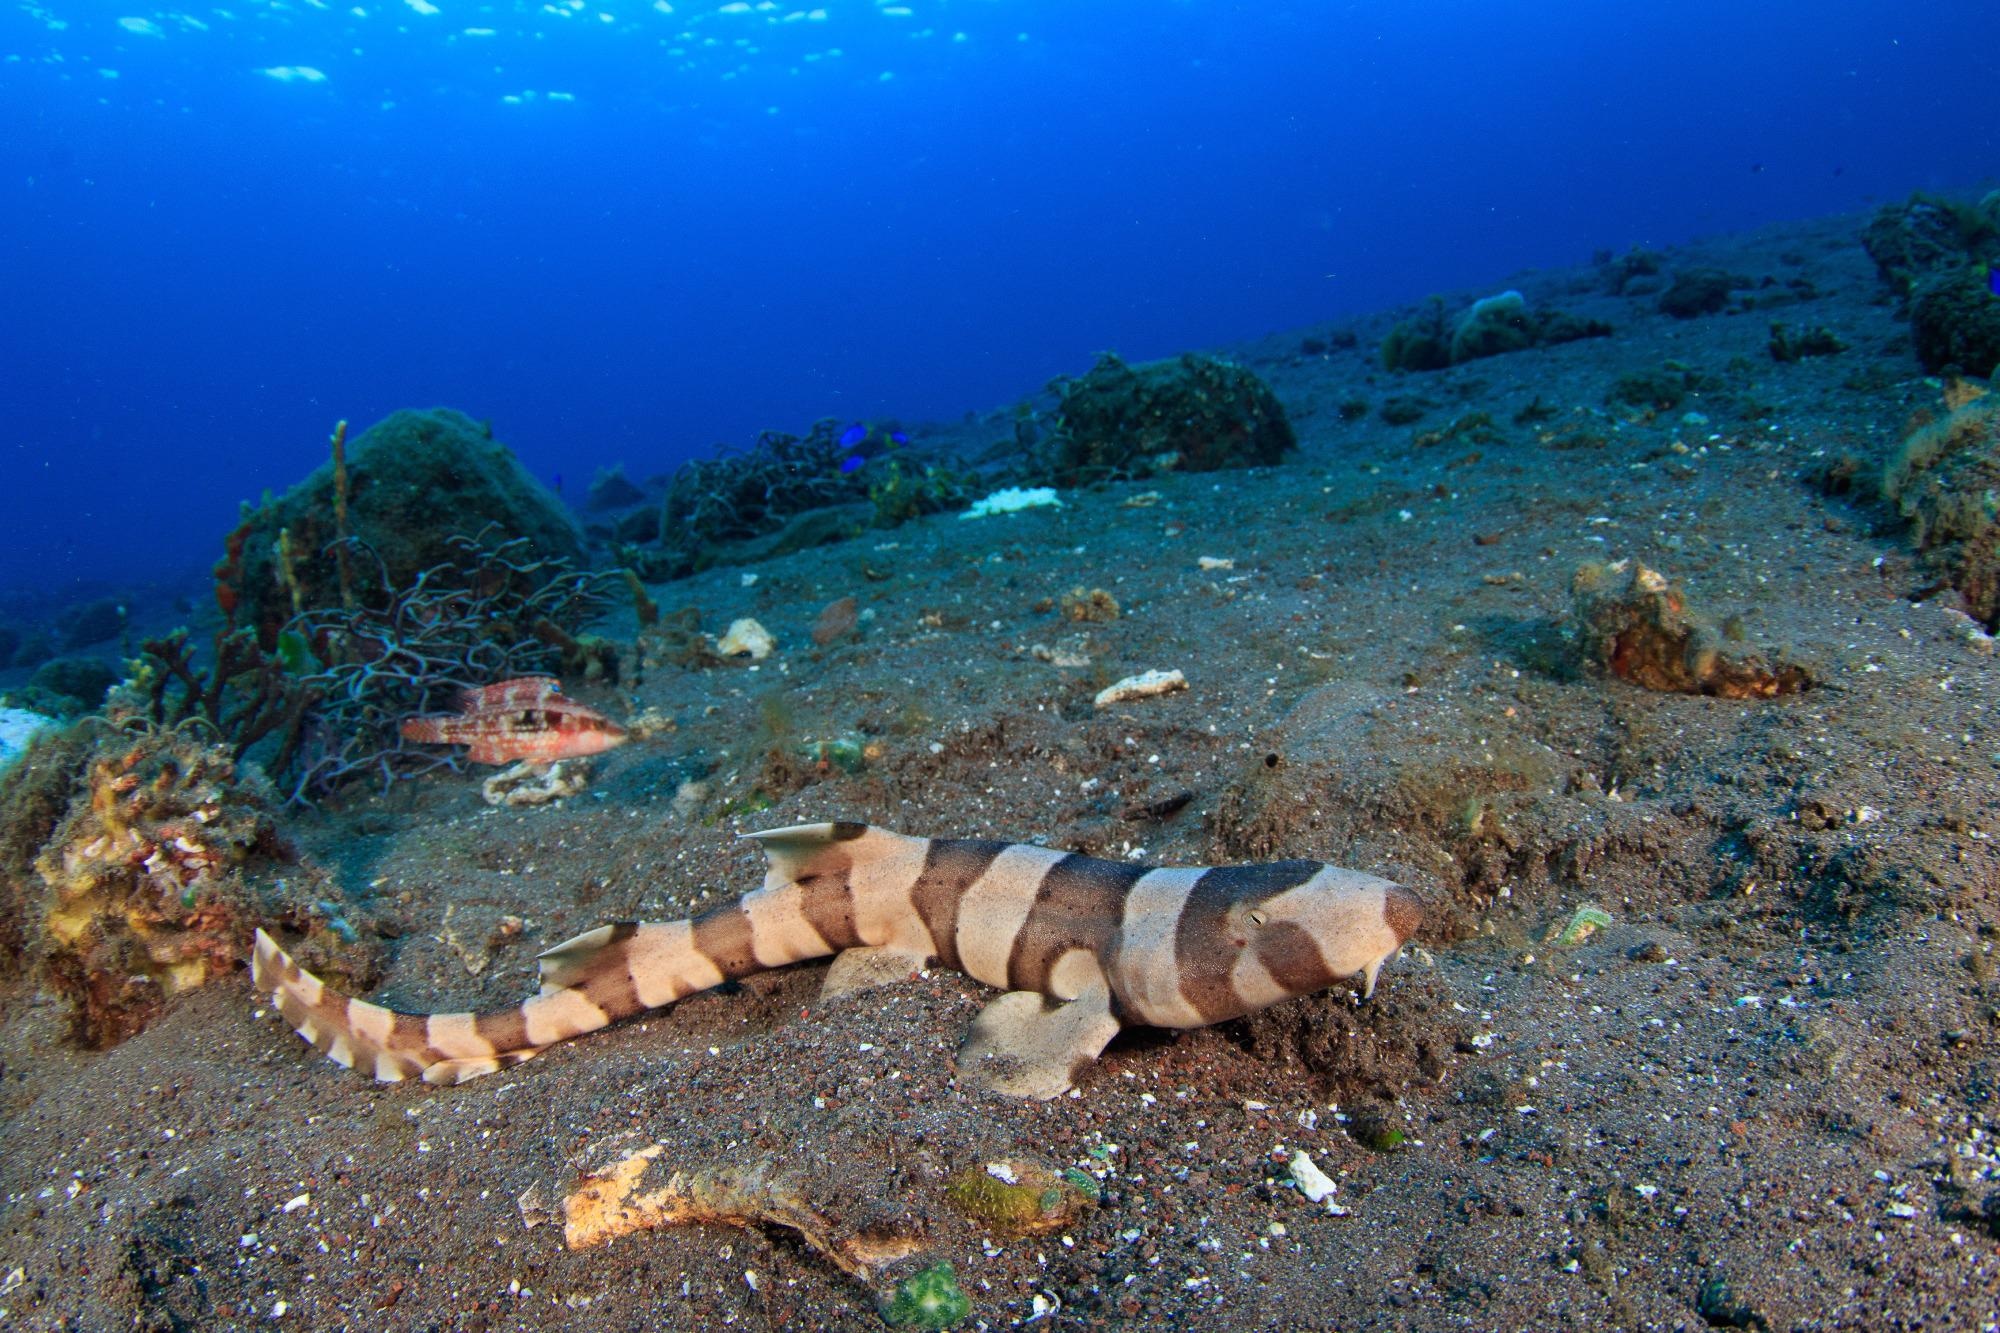 Study: A Class of Shark-Derived Single-Domain Antibodies can Broadly Neutralize SARS-Related Coronaviruses and the Structural Basis of Neutralization and Omicron Escape. Image Credit: Juvenile brown-banded Bamboo shark. Image Credit: SergeUWPhoto / Shutterstock